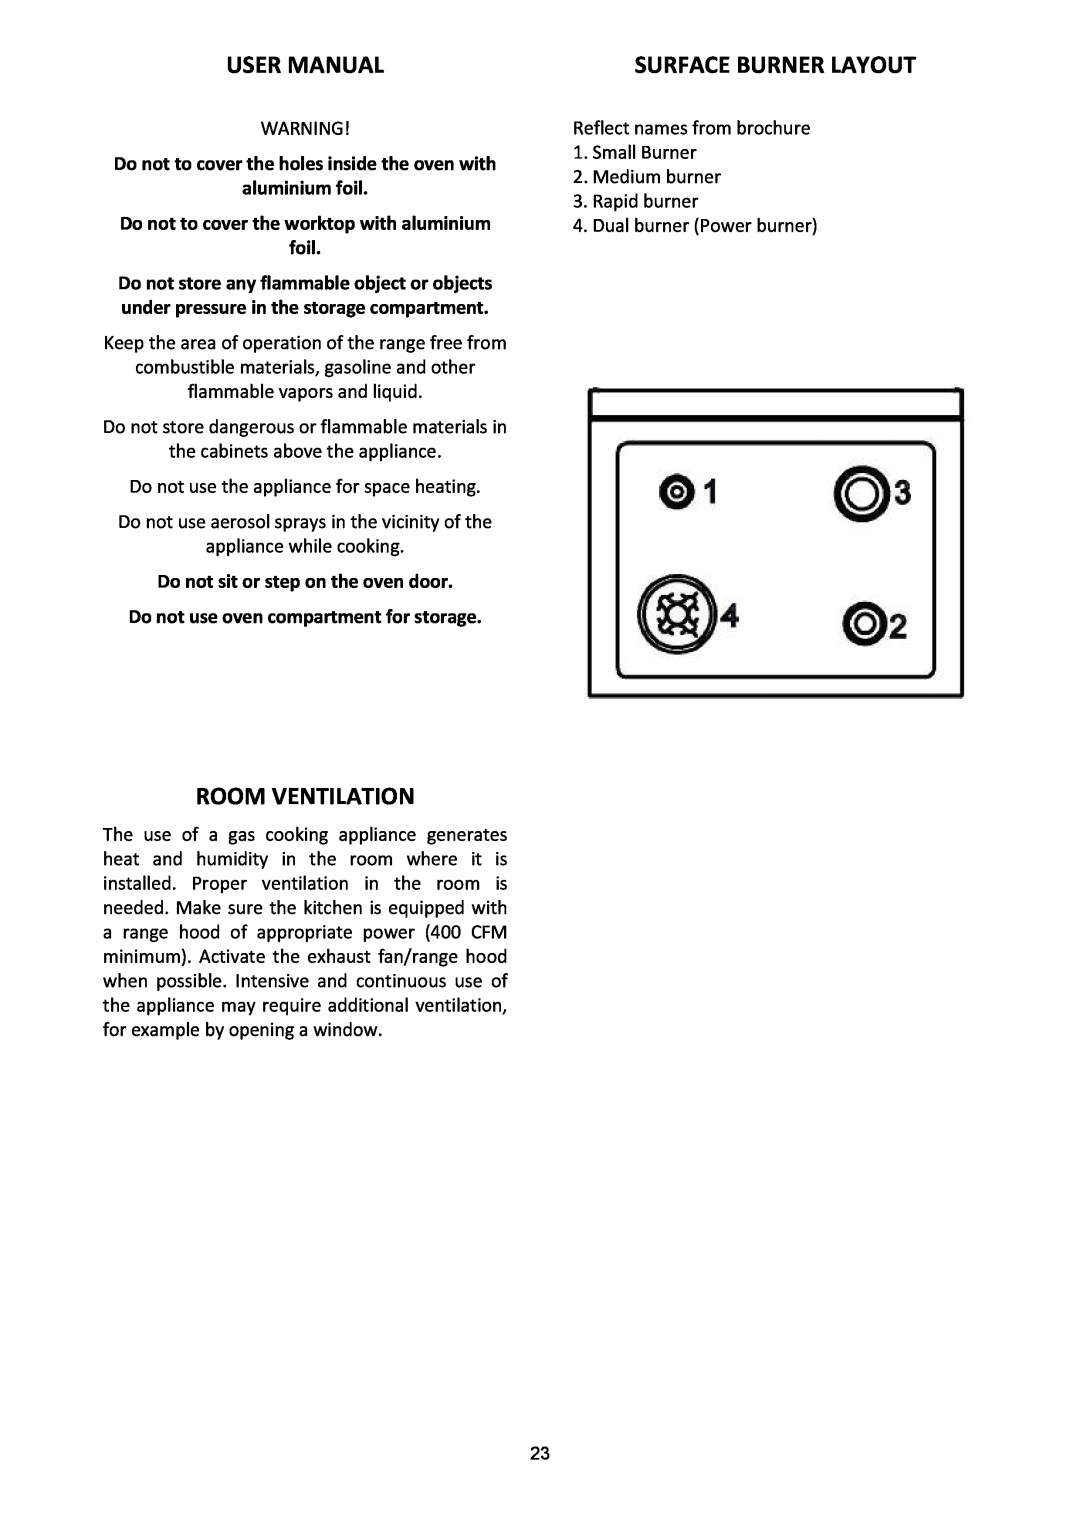 Bertazzoni A304GGVXT User Manual, Surface Burner Layout, Room Ventilation, Do not to cover the worktop with aluminium foil 